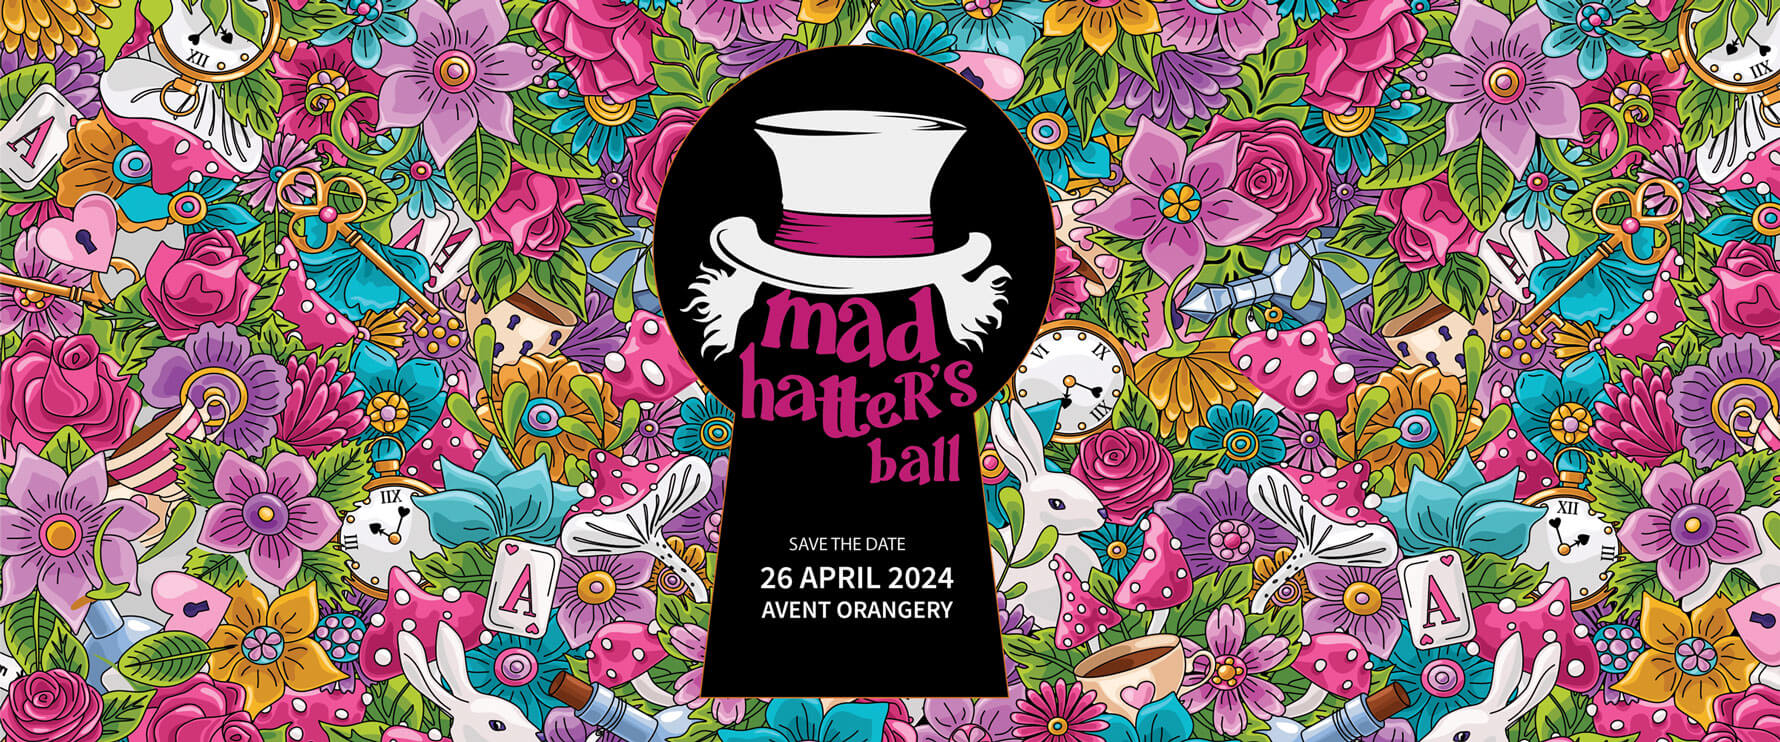 2024 (Un)Gala: Mad Hatter's Ball. Save the date: April 26, 2024